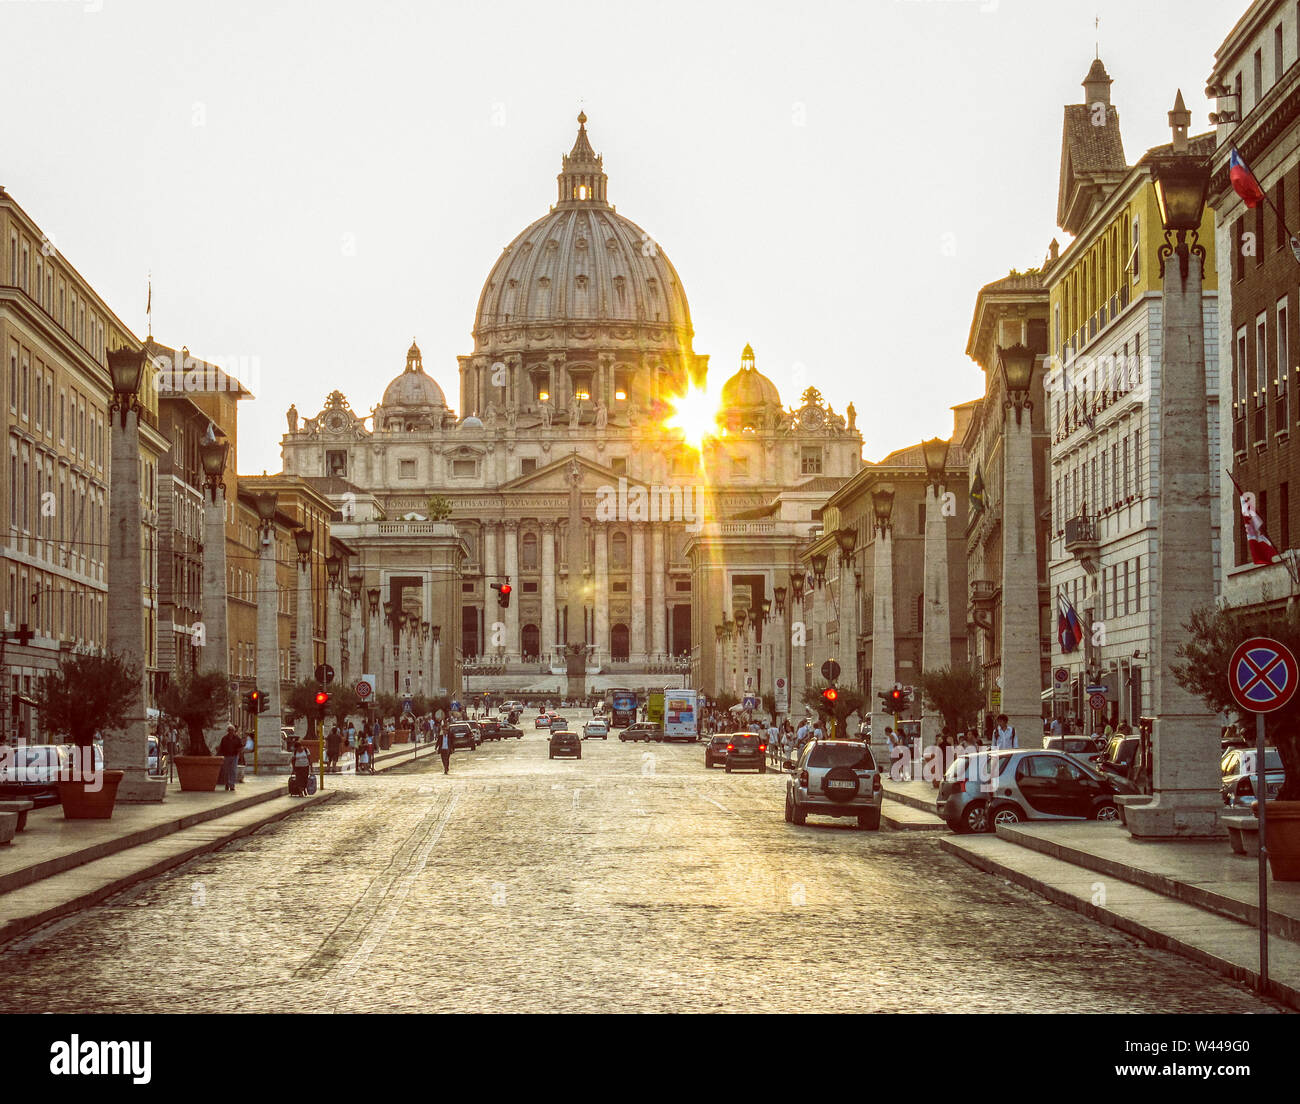 Road (Via della Conciliazione) leading to St. Peter's Basilica. Rome, Italy. Photographed about 30 minutes prior to sunset. Stock Photo